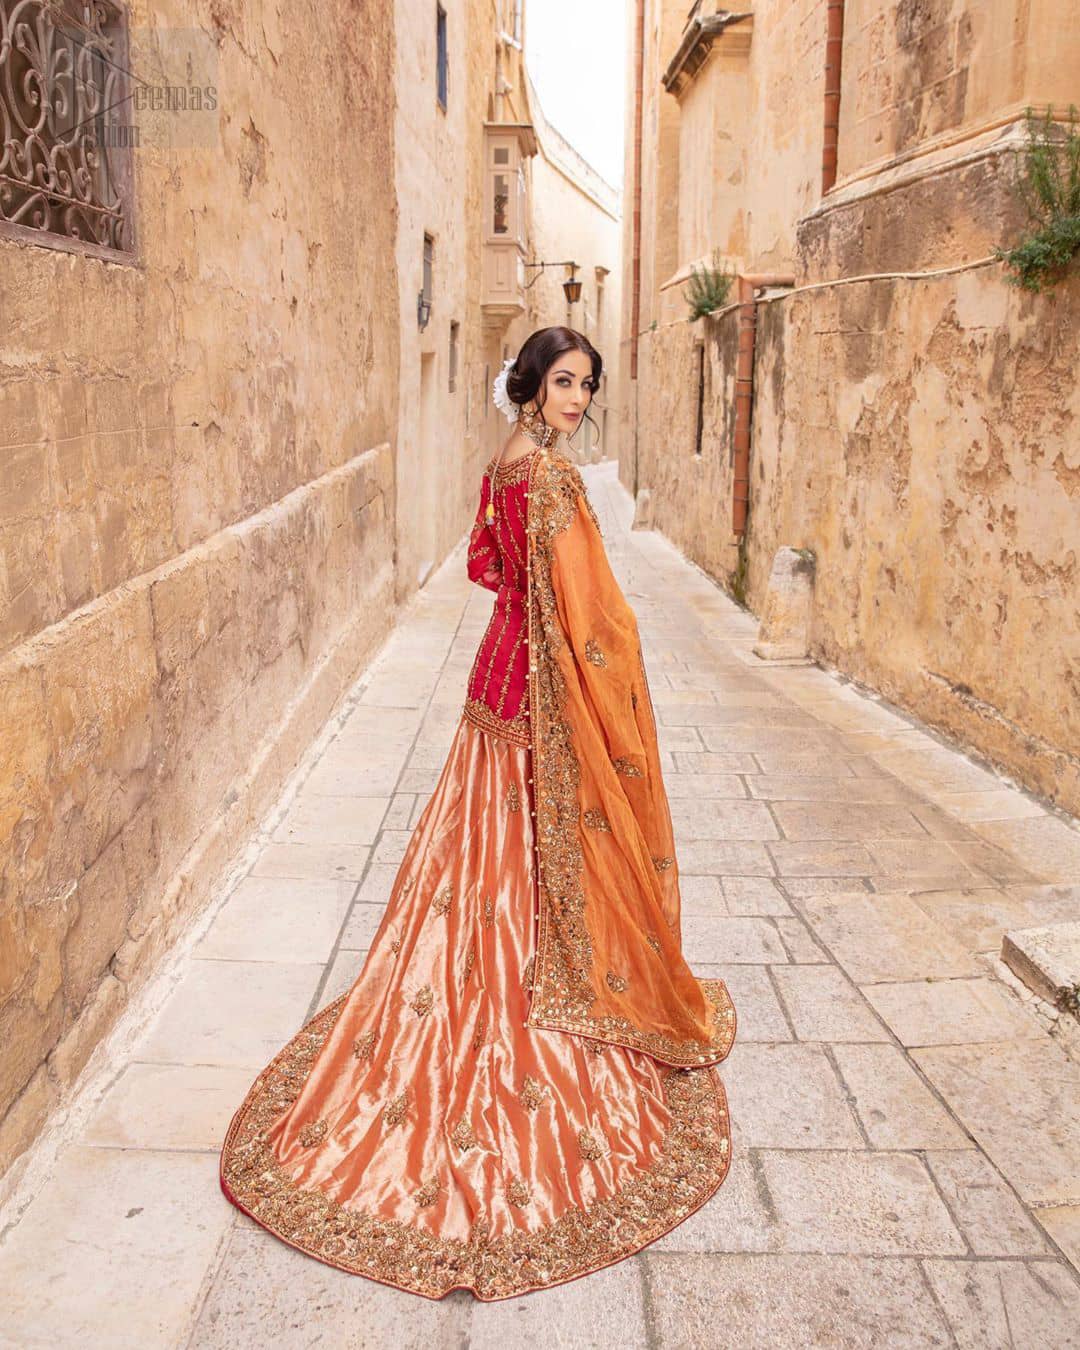 Make your big day more beautiful with our excessively embroidered back train lehenga shirt featuring delicately embellished neckline along with geometric patterns highlighted in antique shaded embroidery detailing and intricately embroidered borders that gives perfect ending to this outfit. Pair it up with a breathtaking back train lehenga with scattered motifs on the ground and embellished hemline. The orange organza dupatta with floral motifs and finishing all around the edges makes the look complete. The combination of orange with red is absolutely breathetaking.